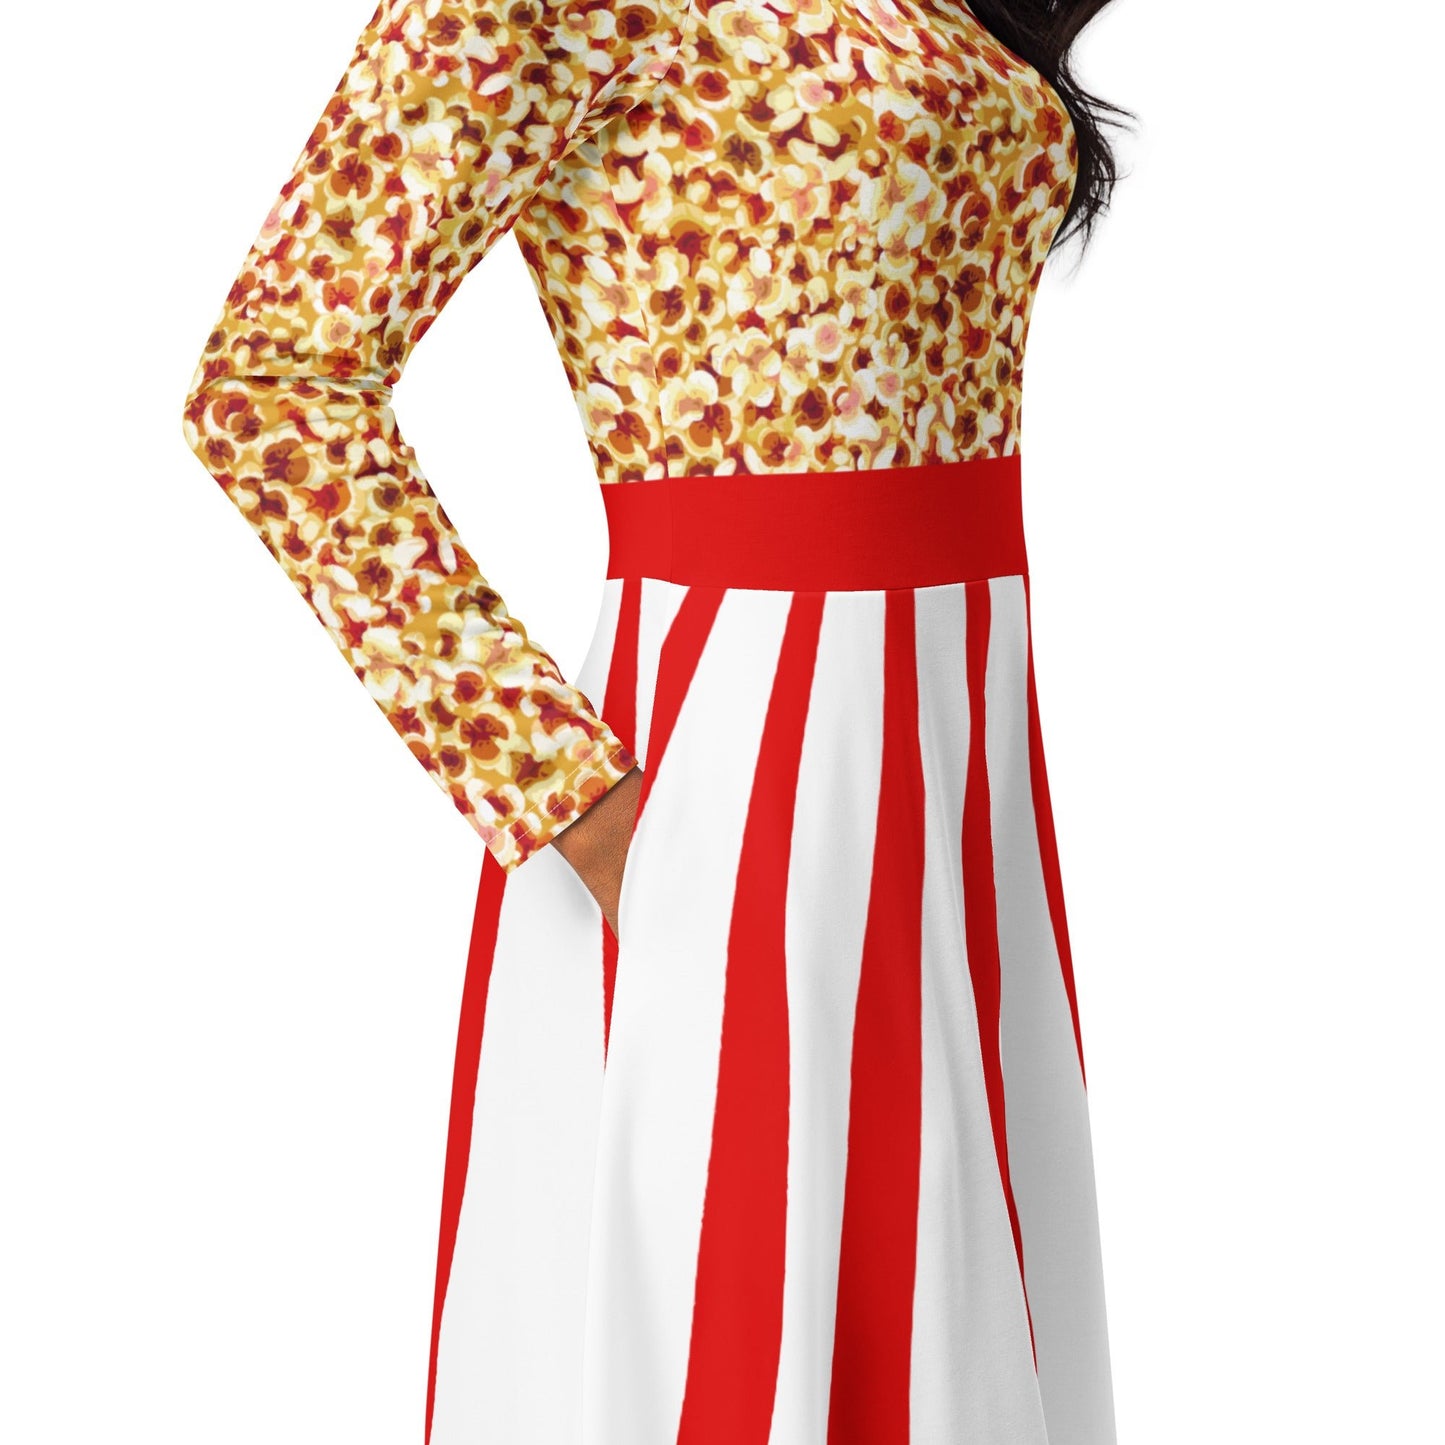 Big Top Snacks long sleeve midi dress carnival dresscarnival styleWrong Lever Clothing